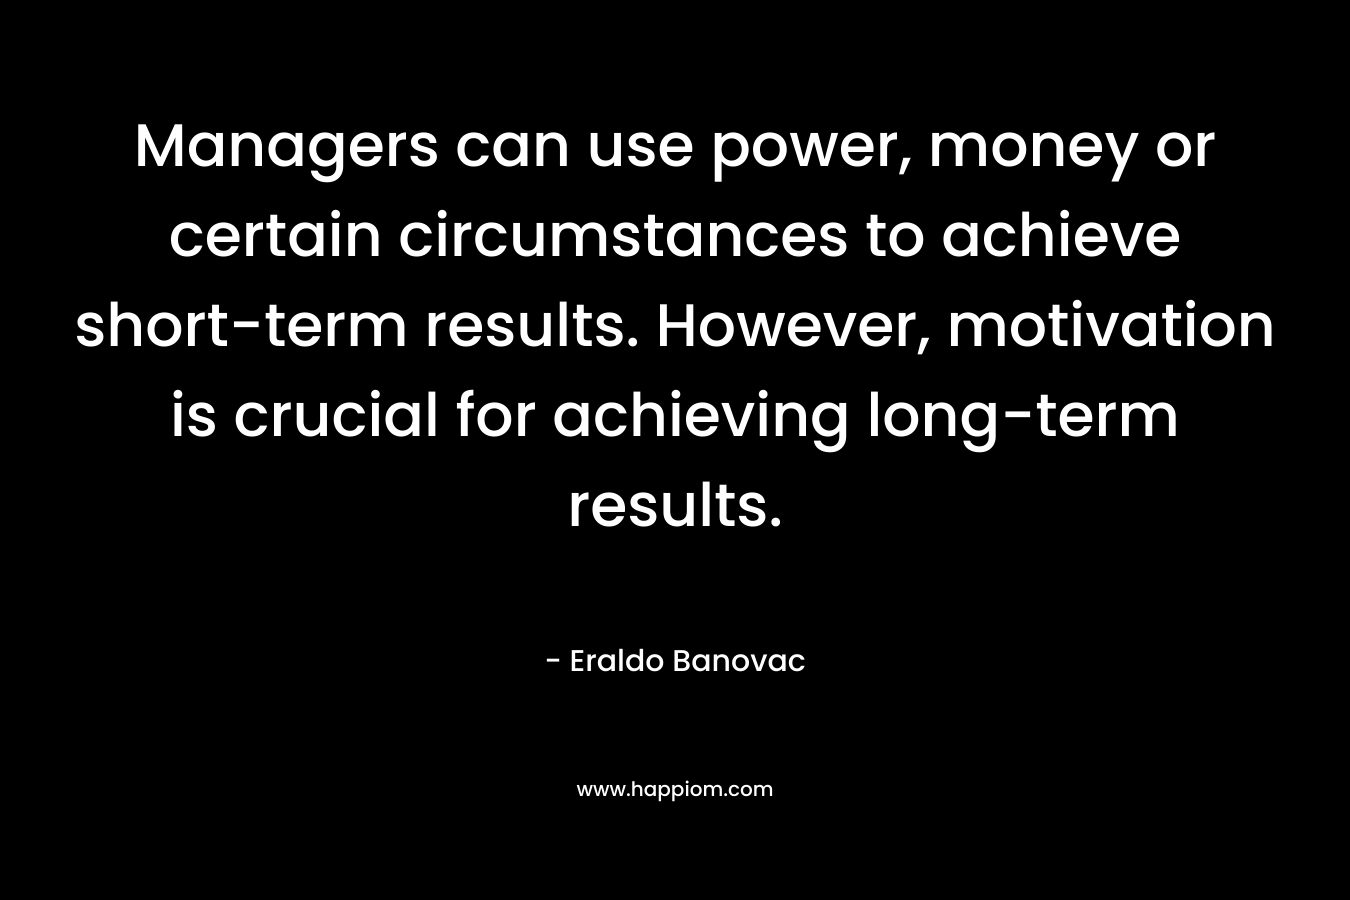 Managers can use power, money or certain circumstances to achieve short-term results. However, motivation is crucial for achieving long-term results.